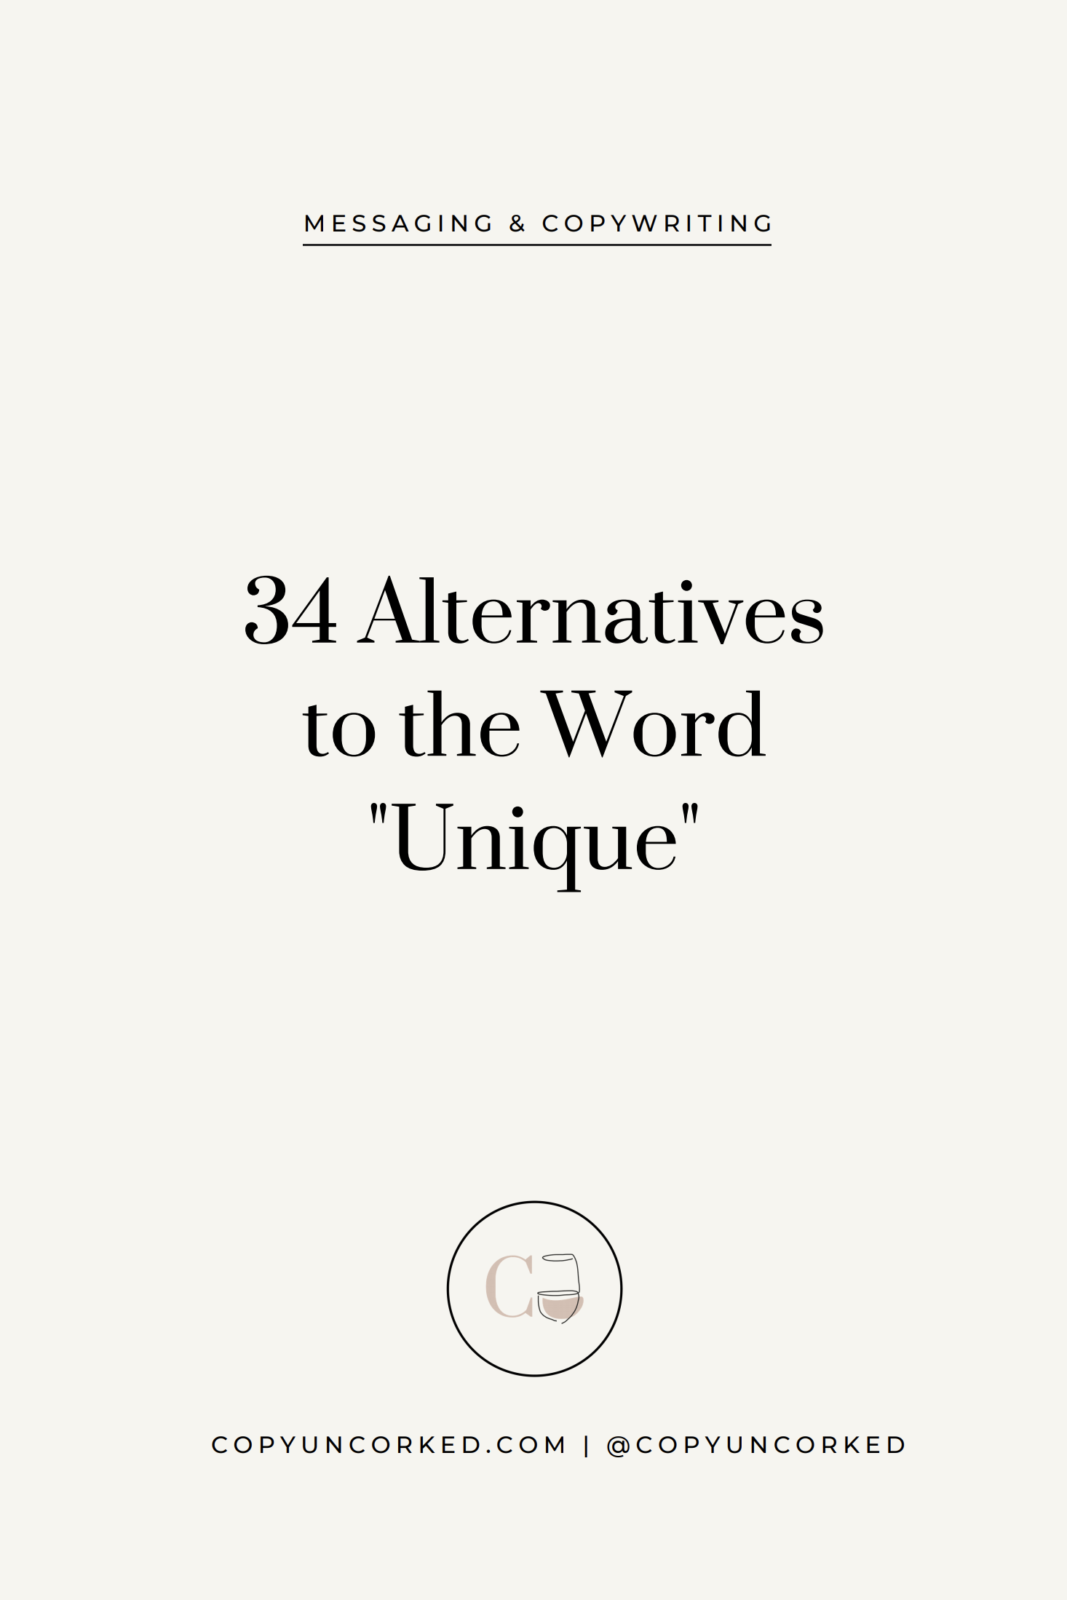 34 Alternatives to the Word Unique - Try these in your copywriting! - copyuncorked.com